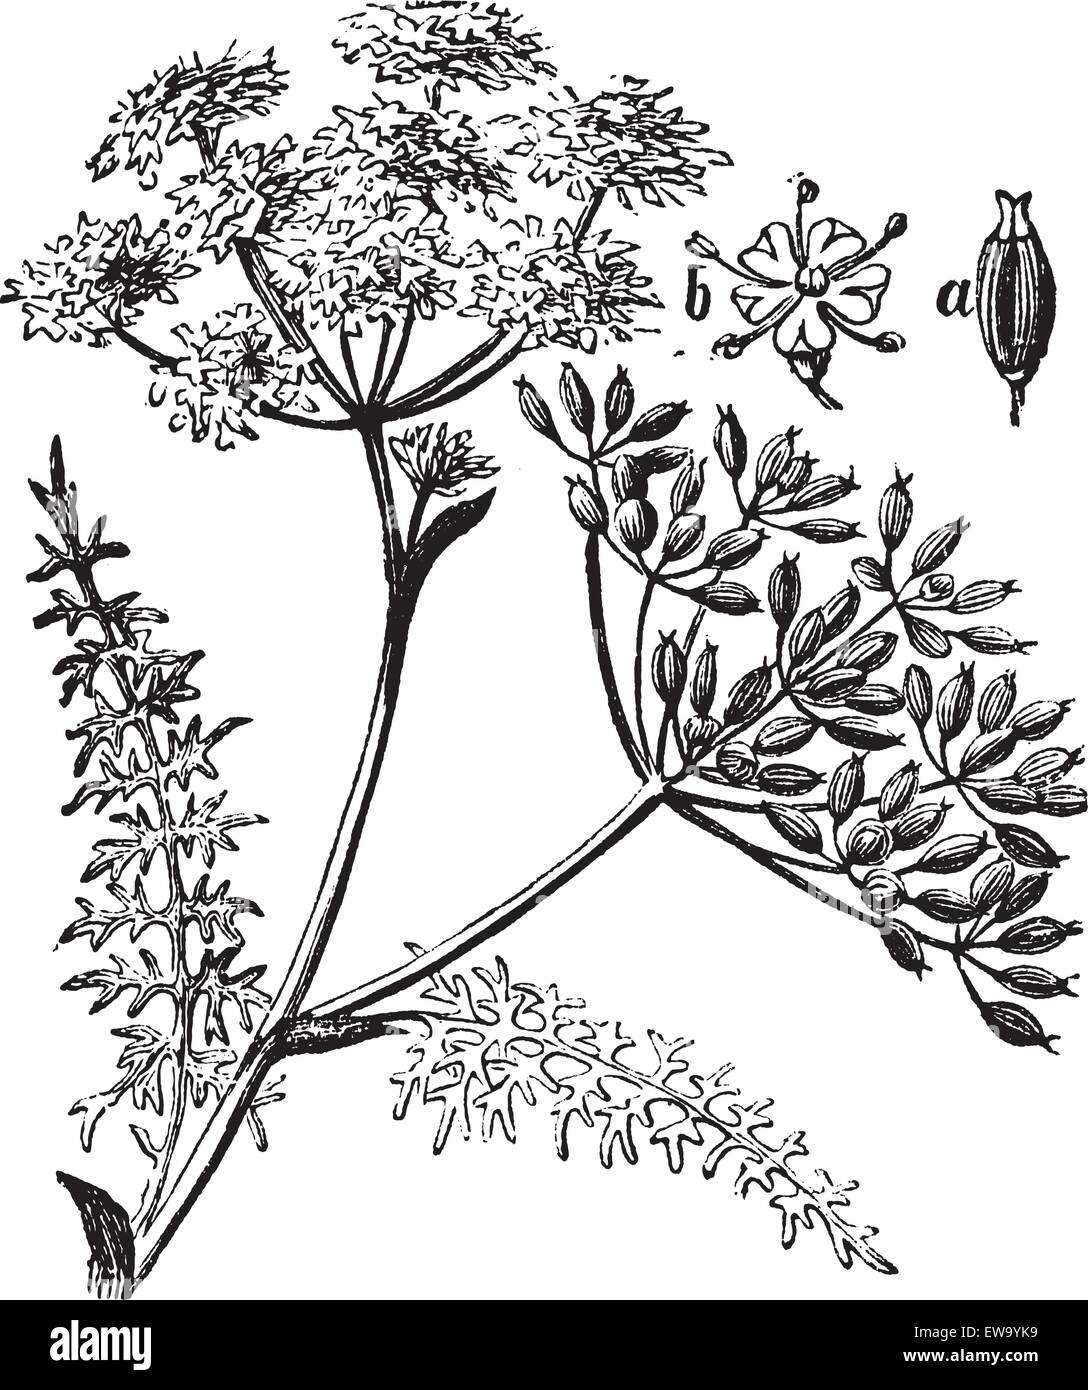 Caraway or Carum carvi or meridian fennel or Persian cumin vintage engraving. Old engraved illustration of caraway plant. Stock Vector